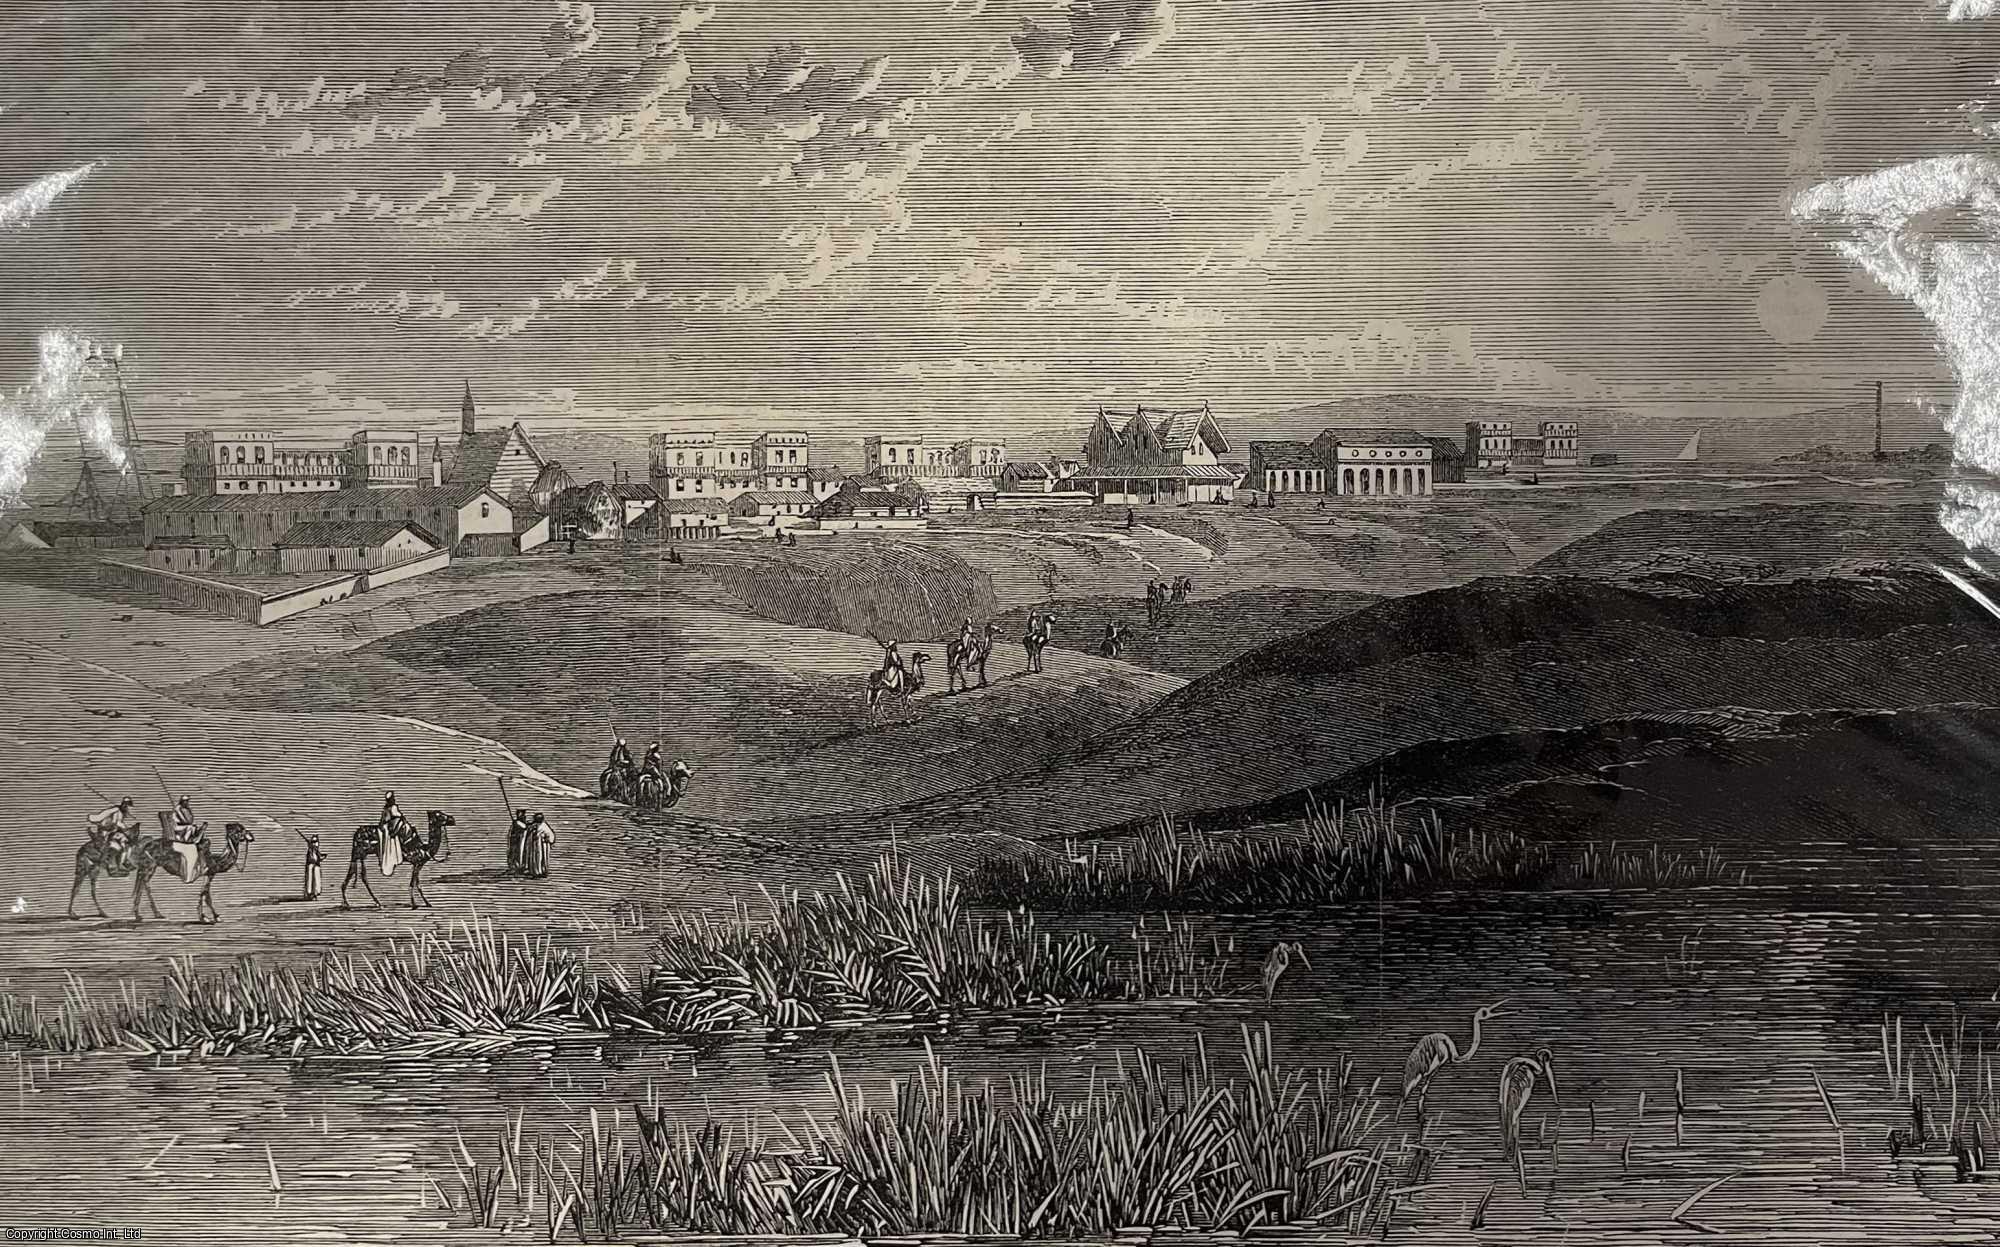 SUEZ CANAL - Ismaila on the Suez Canal. An original print from the Illustrated London News, 1866.